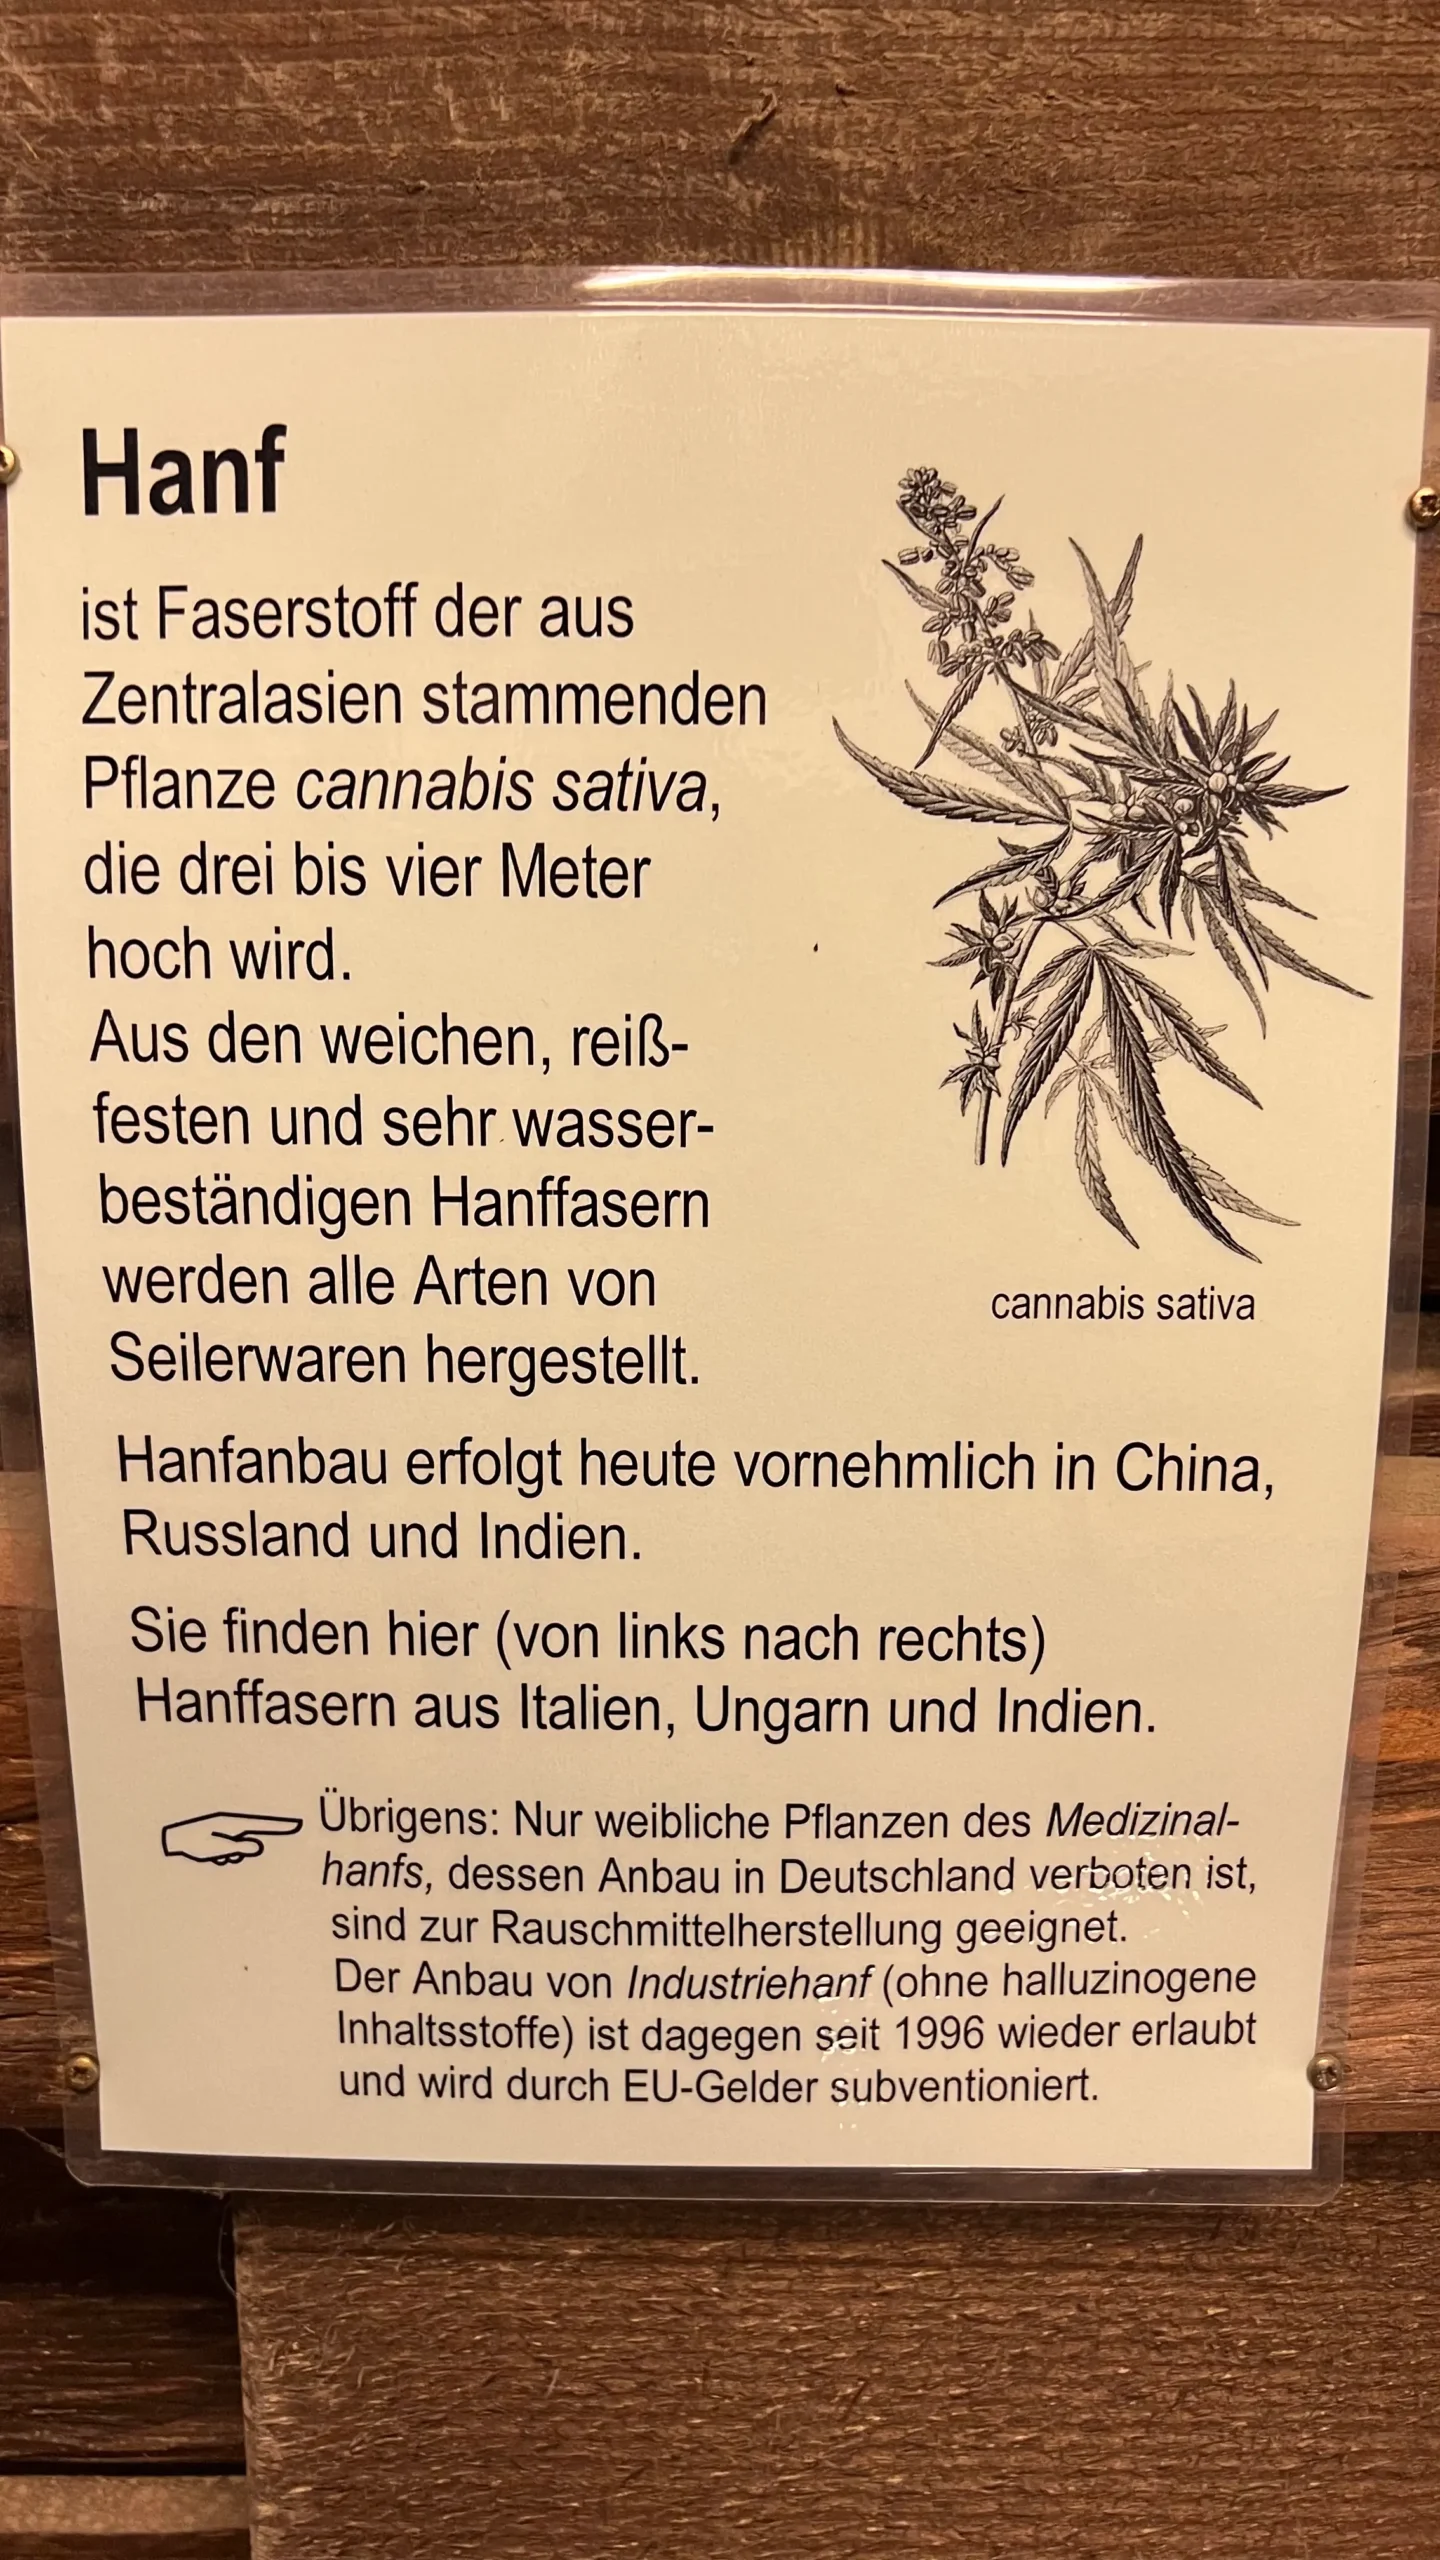 Small poster with an image of a hemp flower / leaves: 

Hemp is a fiber from the plant cannabis sativa, native to Central Asia, which grows three to four meters tall.

From the soft, tear-resistant and very water-resistant hemp fibers
are used to make all kinds of rope.

Today, hemp is mainly cultivated in China, Russia and India.

Only female plants of the medicinal hemp, the cultivation of which is prohibited in Germany, are suitable for the production of narcotics. The cultivation of industrial hemp (without hallucinogenic ingredients), on the other hand, has been permitted again since 1996 and is subsidized by EU funds.